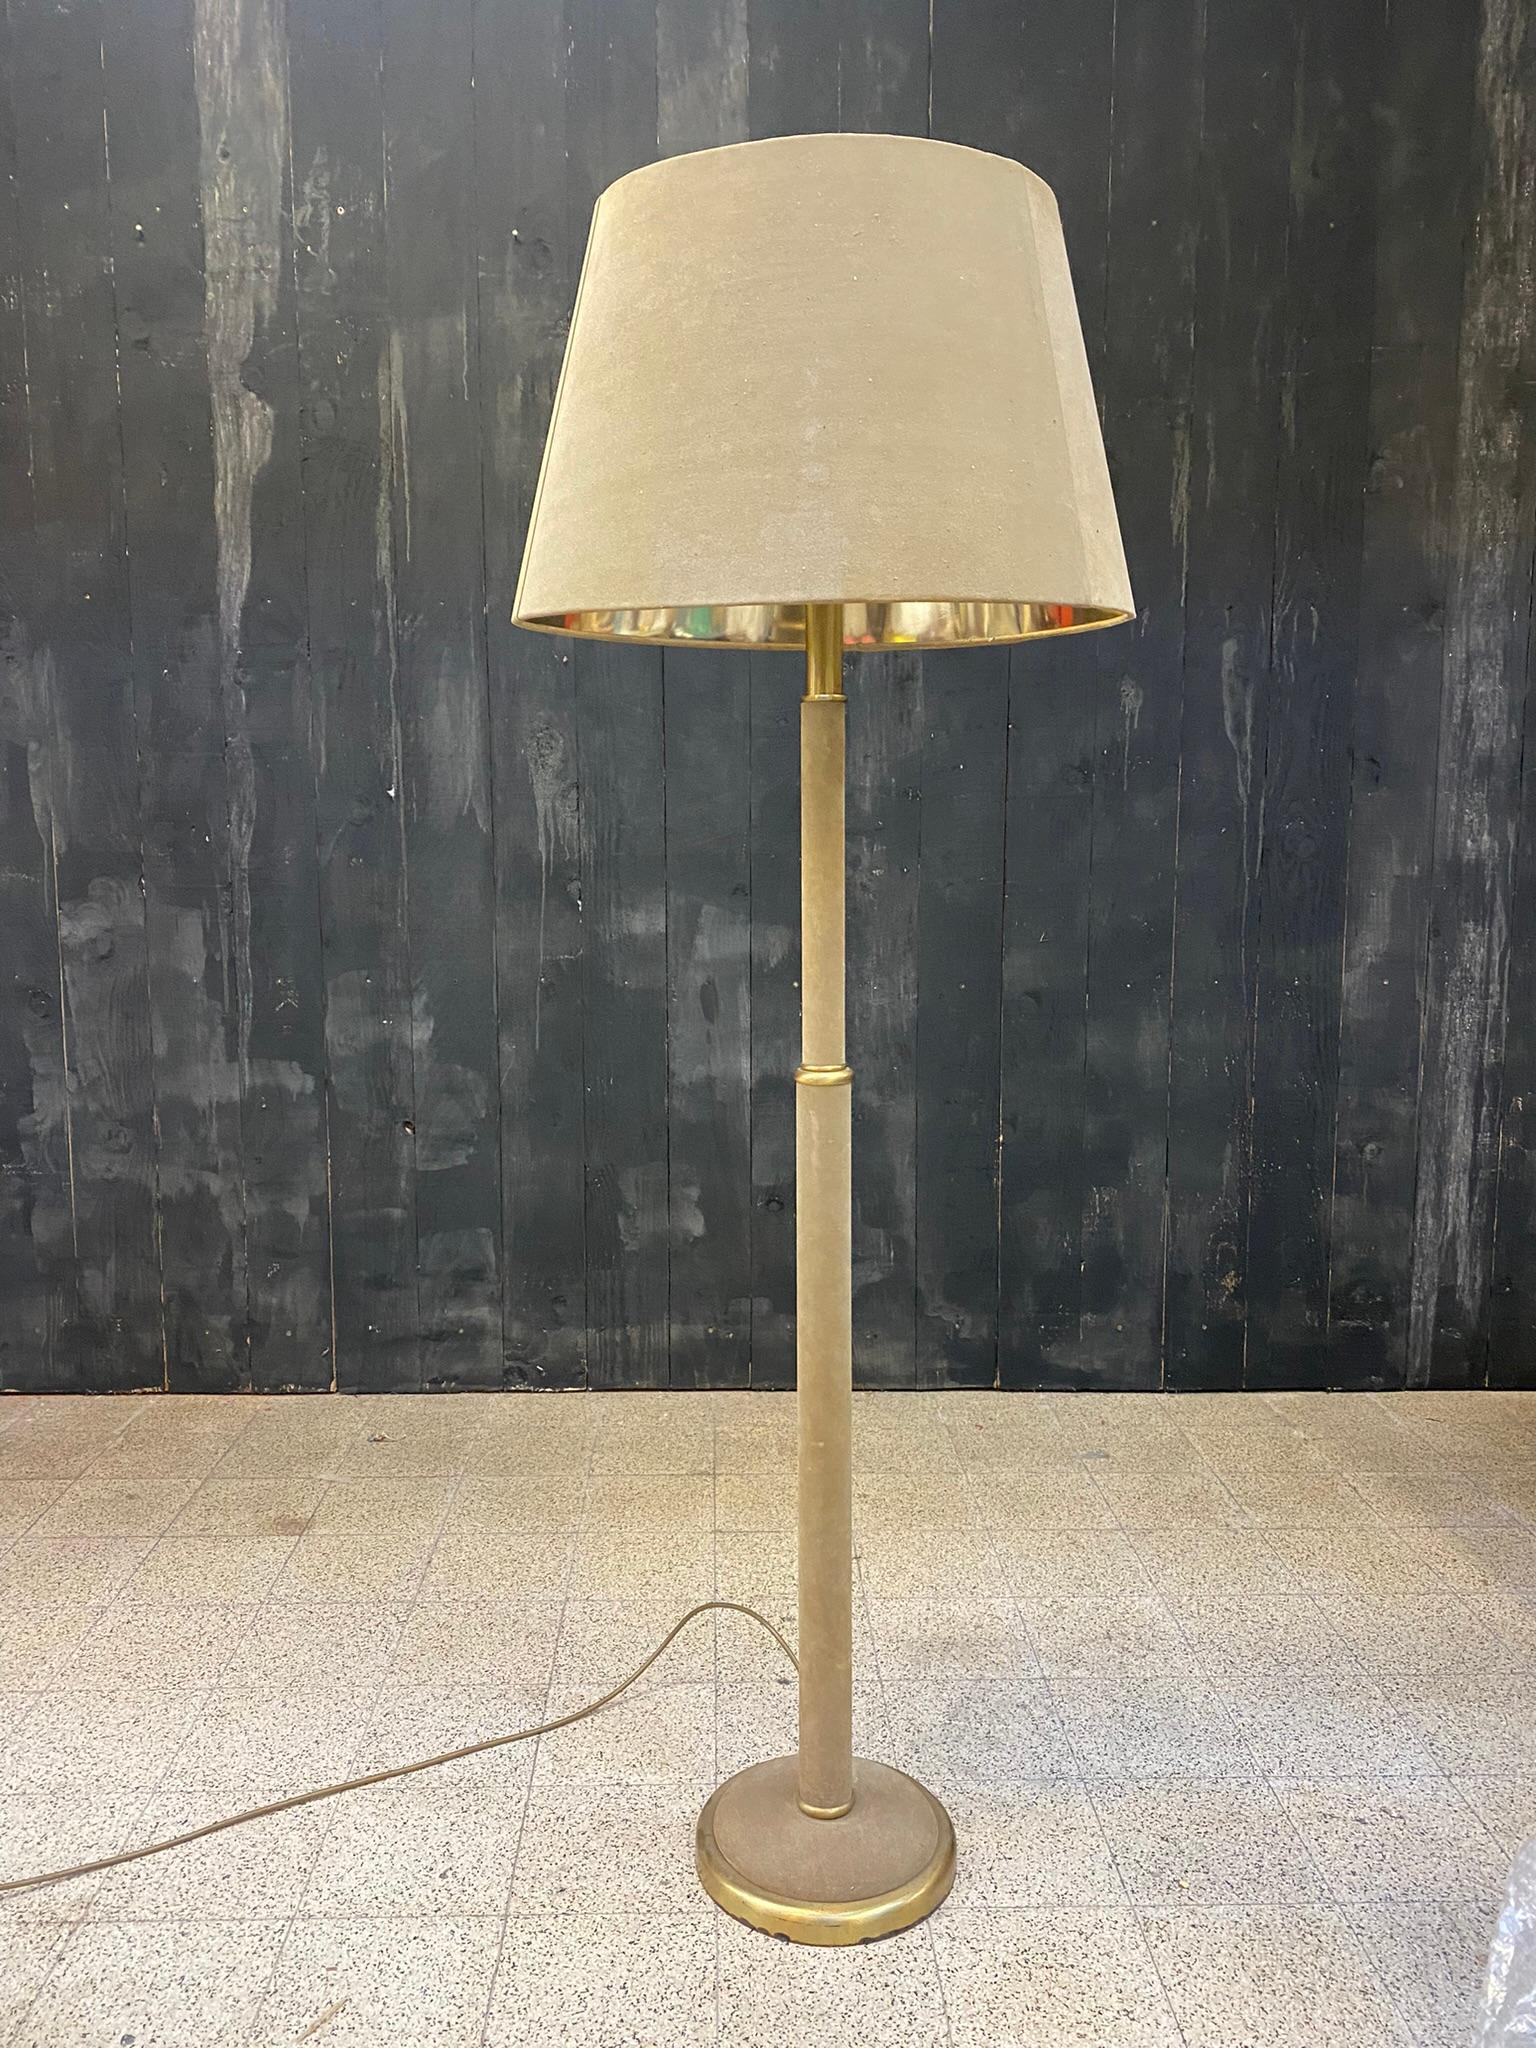 Elegant Floor Lamp in Suede Leather in the Style of Jacques Adnet, circa 1960 For Sale 2